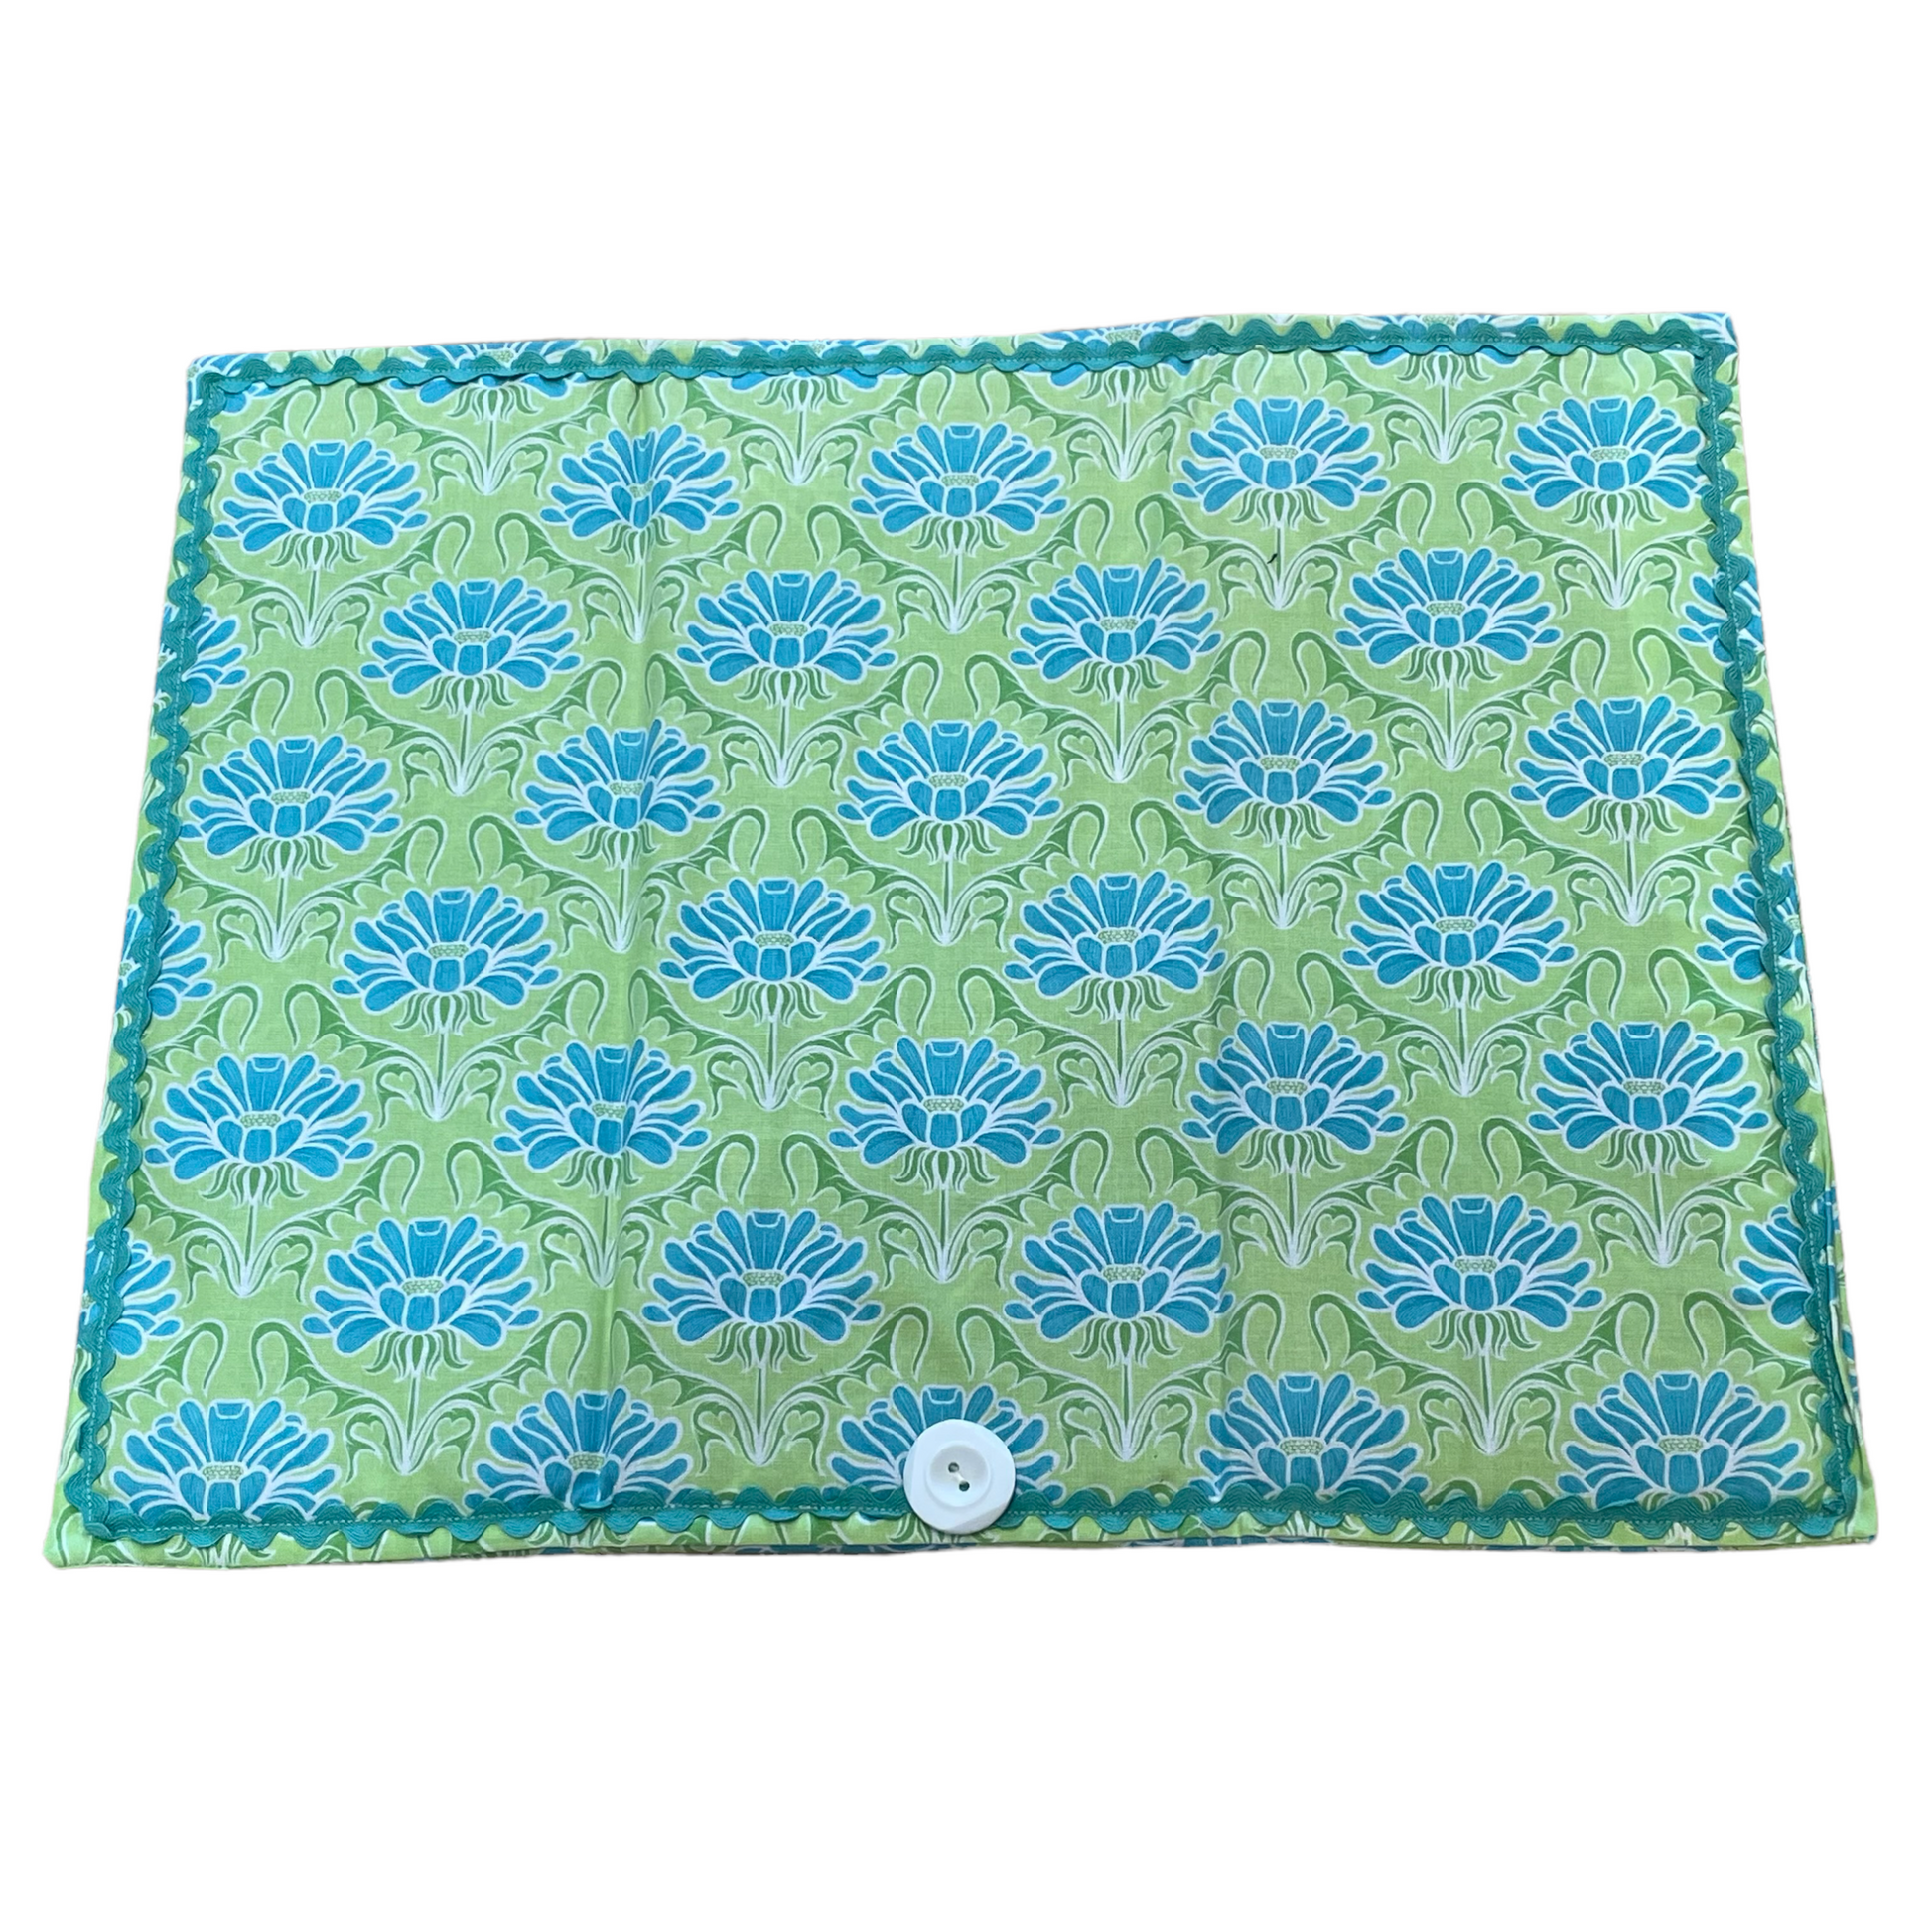 Teal and Green handcrafted dish drying mat. Featuring teal flowers, ric rac and a white button. Part of a coordinated collection of kitchen linens. Shop the collection, or follow along on with sewing and 3d Layered Mandala tutorials on the Home Stitchery Decor YouTube Channel